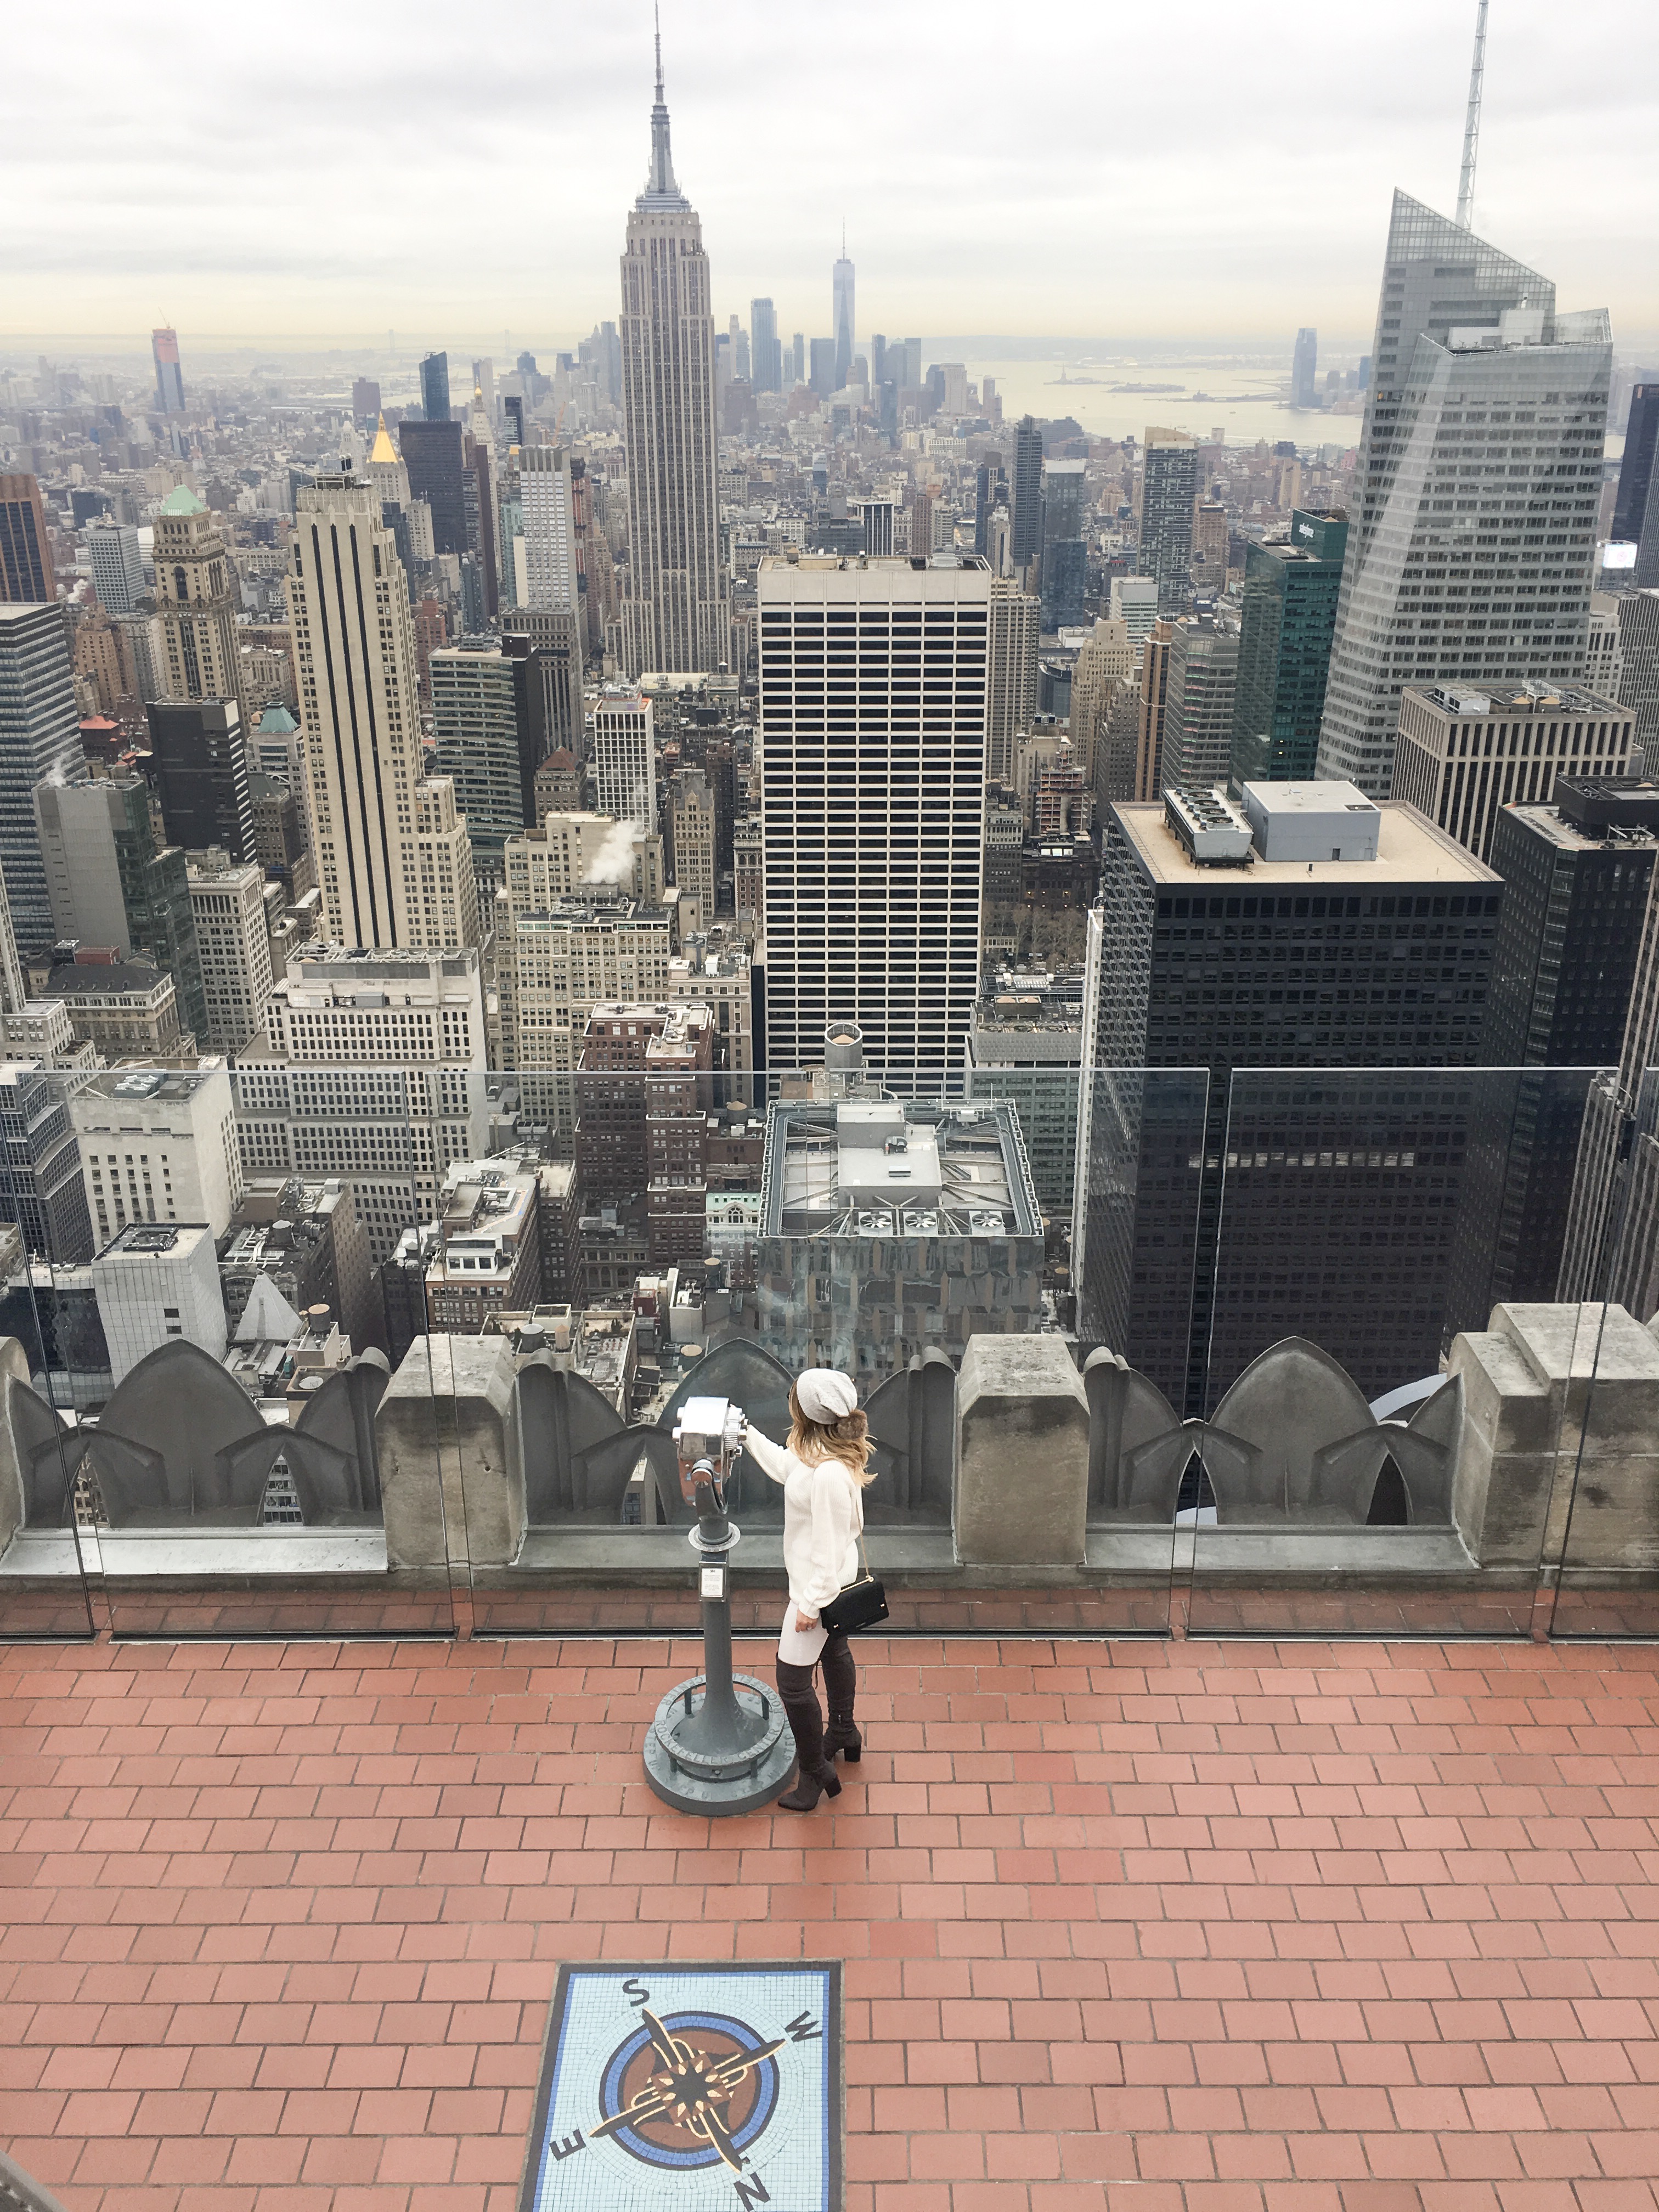 new york top of the rock - 5 Best US Travel Destinations by popular Chicago travel blogger Visions of Vogue